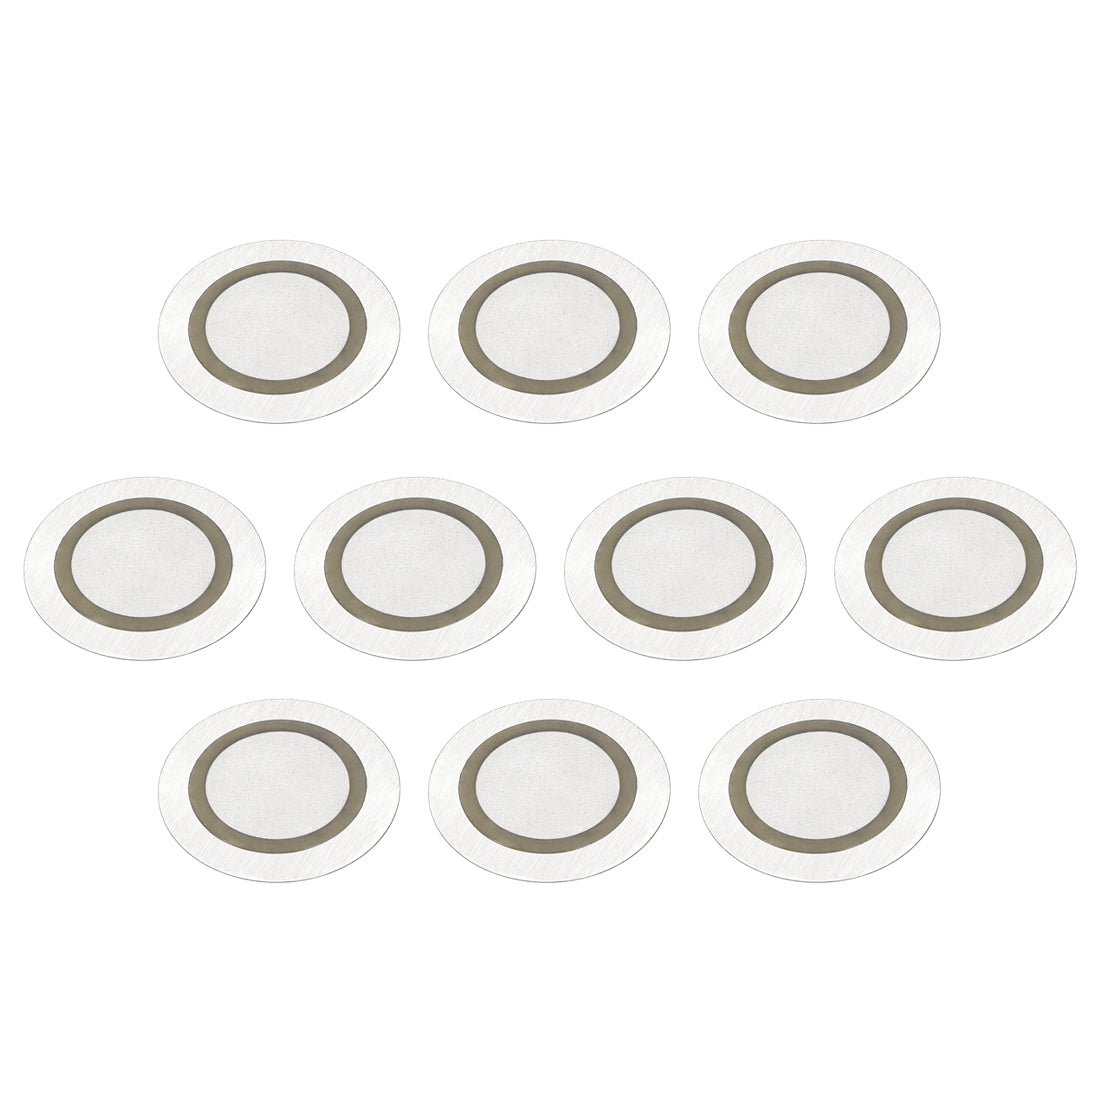 uxcell Uxcell 10 Pcs Discs 20mm Acoustic Pickup Transducer Microphone Trigger Buzzer Drum Guitar